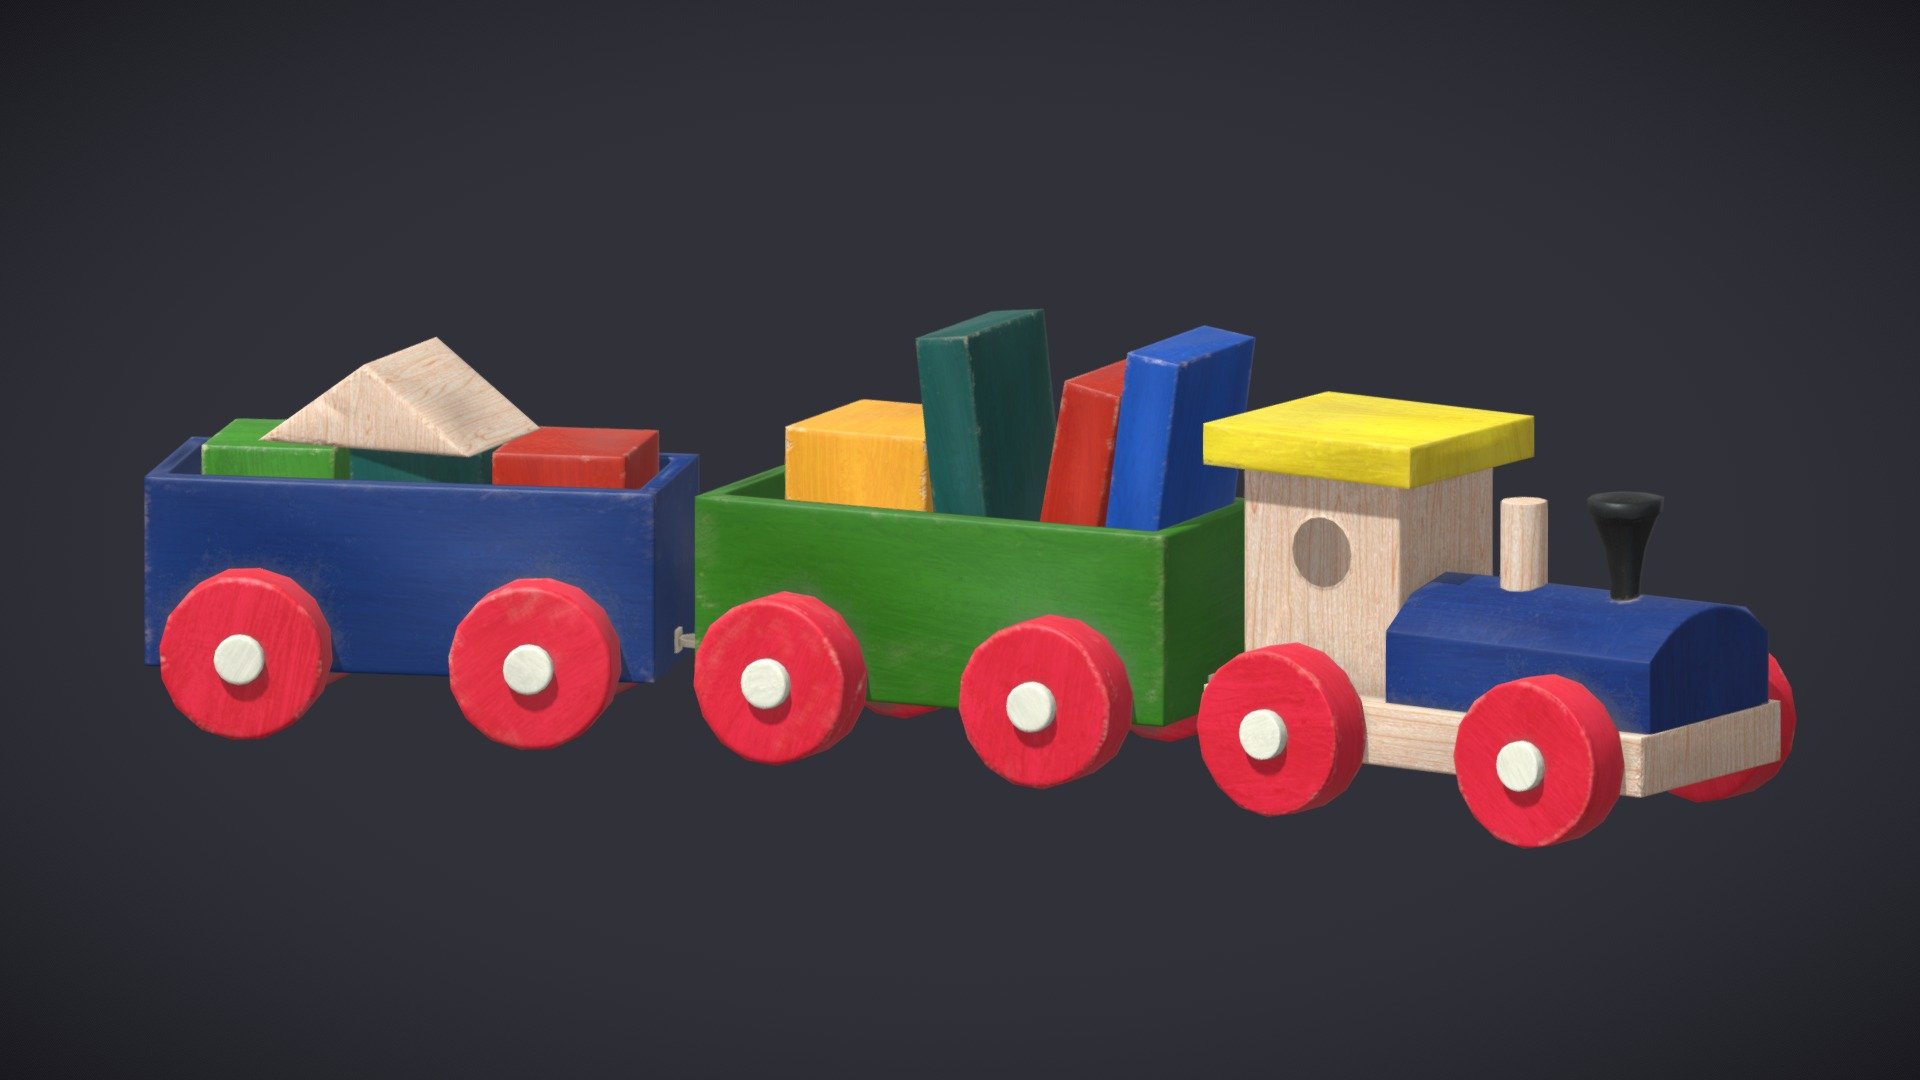 Includes 2 Blender collections: Train (2188 tris) and Blocks (96 tris)




engine and 2 wagons are separate

objects are parented so that engine moves everything and first wagon moves second wagon

wheels have a driver that rotates them when the parent moves

the train is positioned - to achieve neutral pose, select each wagon and clear rotation

Textures




two sets of 2k textures (train, blocks): baseColor, normal, roughness

Extras




Mesh maps baked in Substance Painter (AO, curvature, normal base, position, thickness) - please note that some of the blocks have minor baking artifacts that were fixed in the textures manually

2 FBX files (high and low poly)
 - Wooden Toy Train - Buy Royalty Free 3D model by Katerina Novakova (@KaterinaNovakova) 3d model